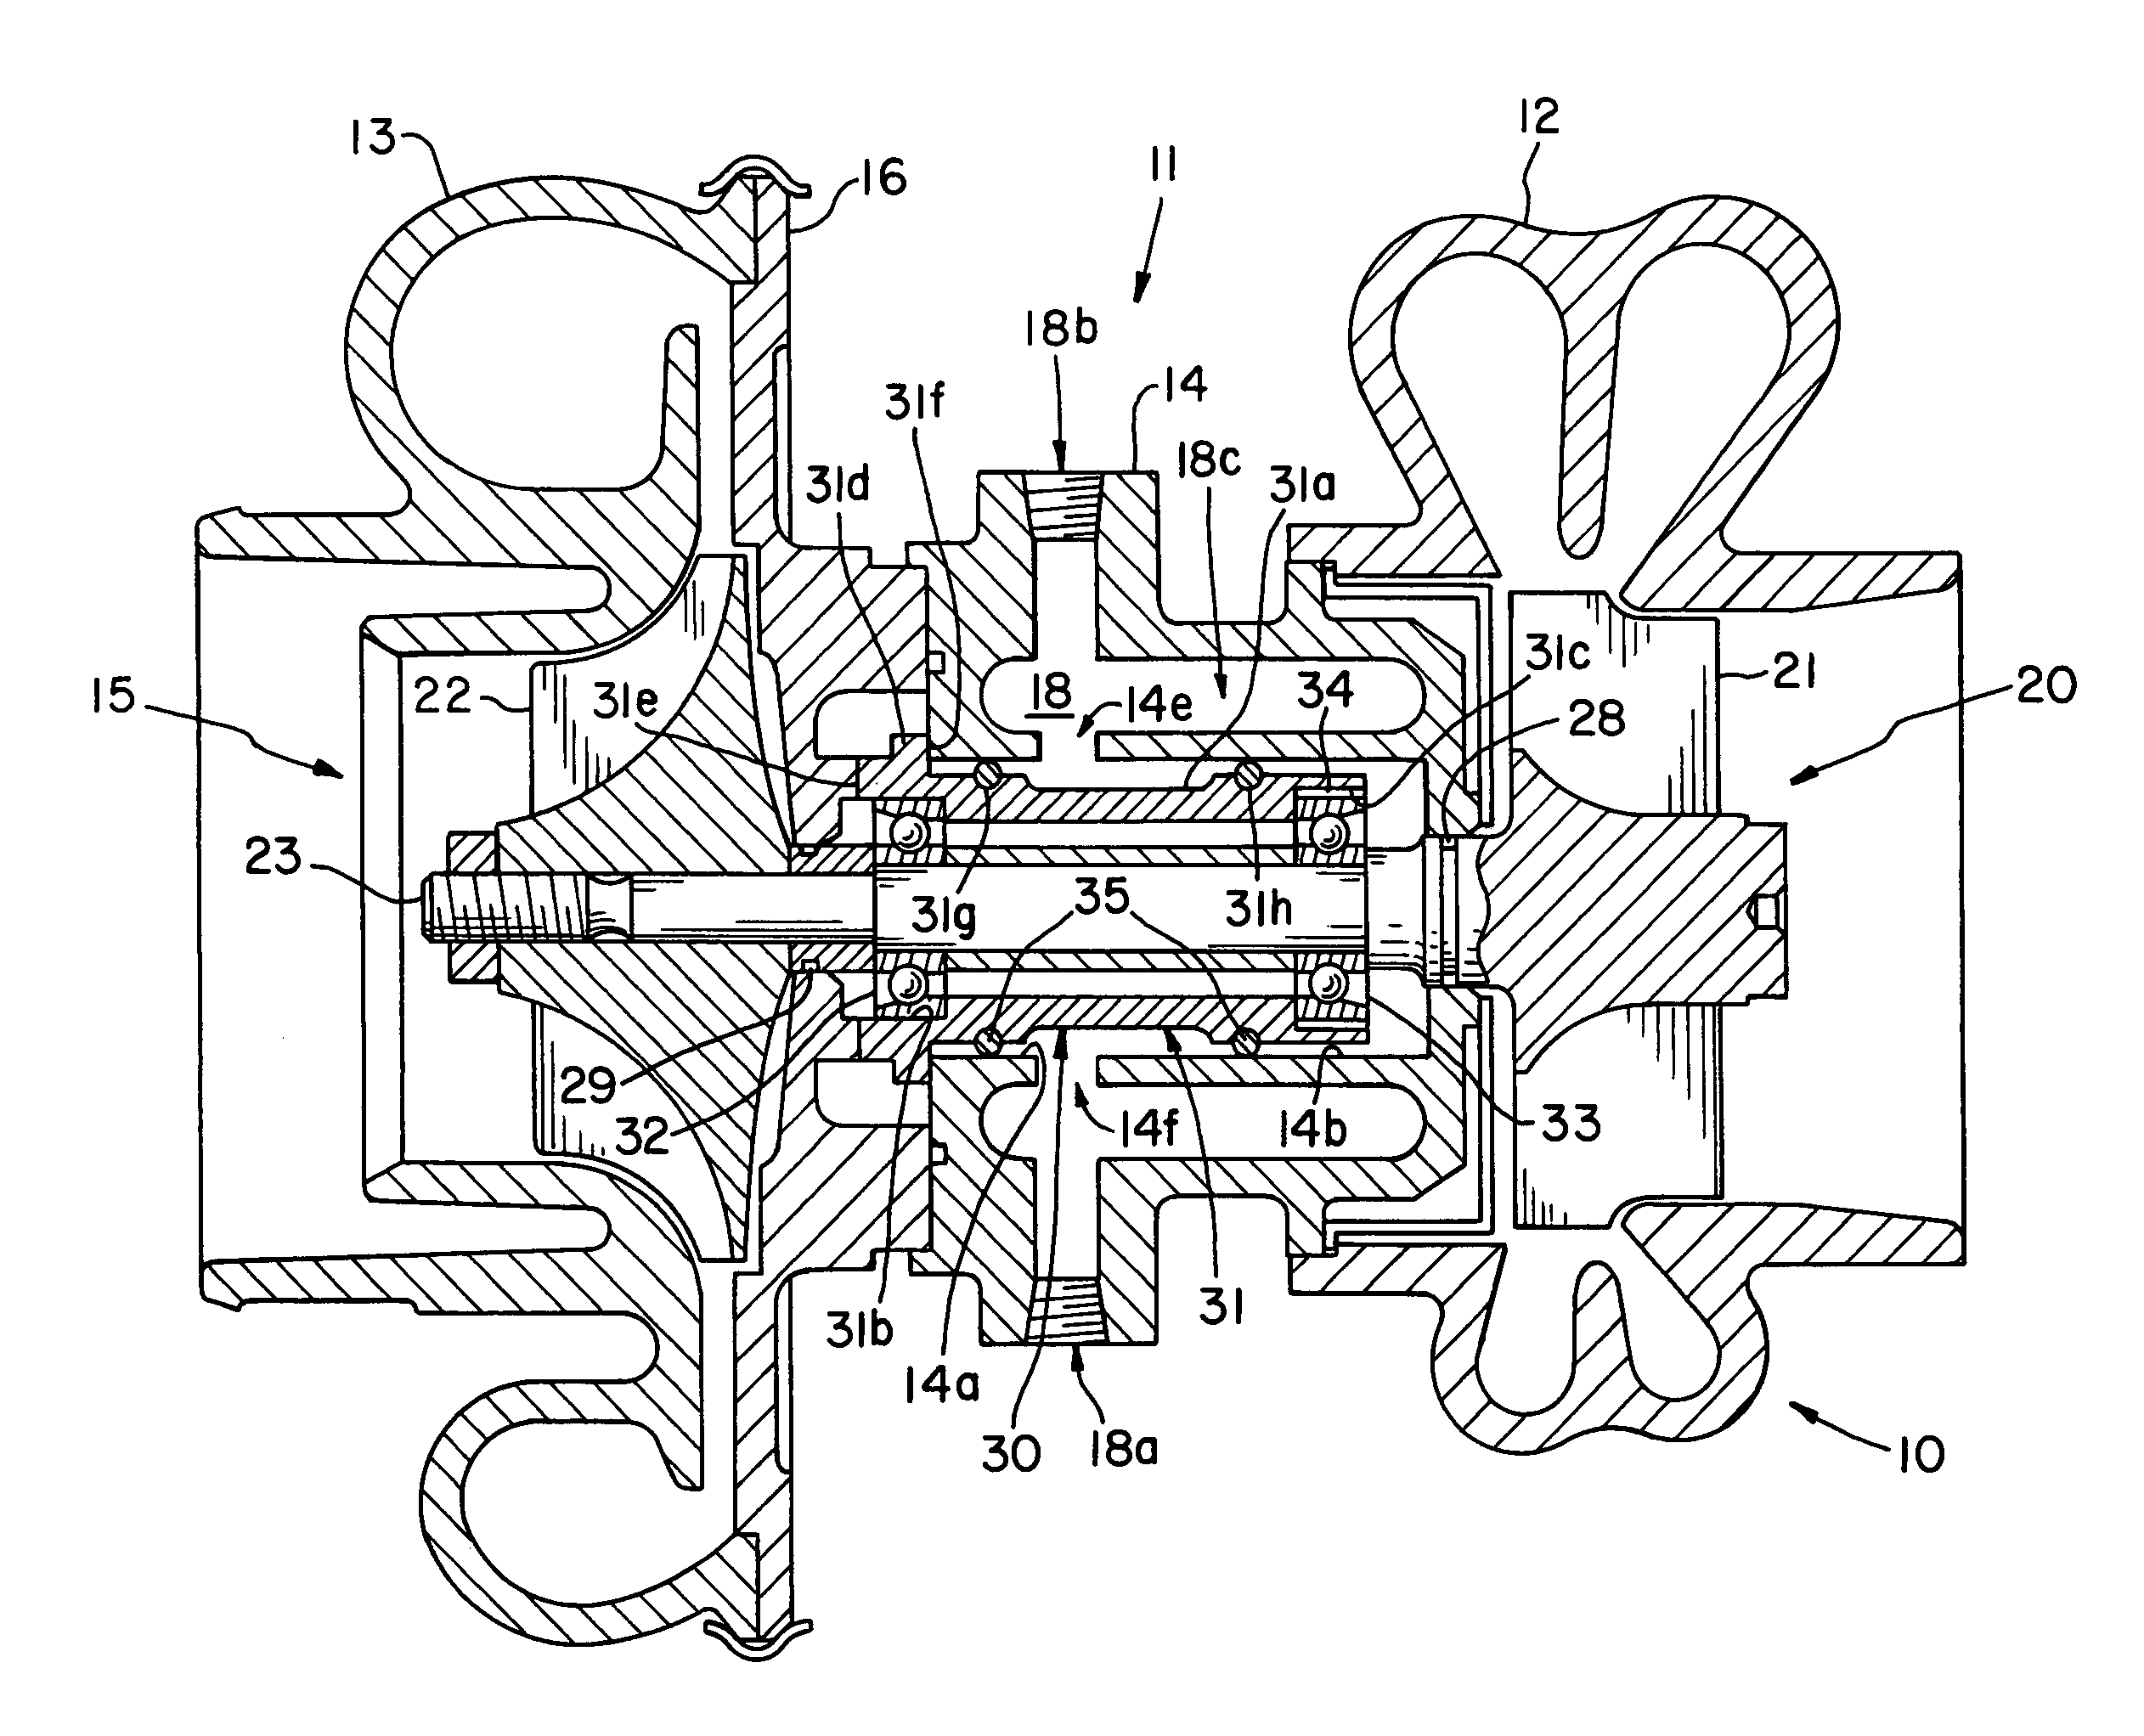 Bearing system for high-speed rotating machinery